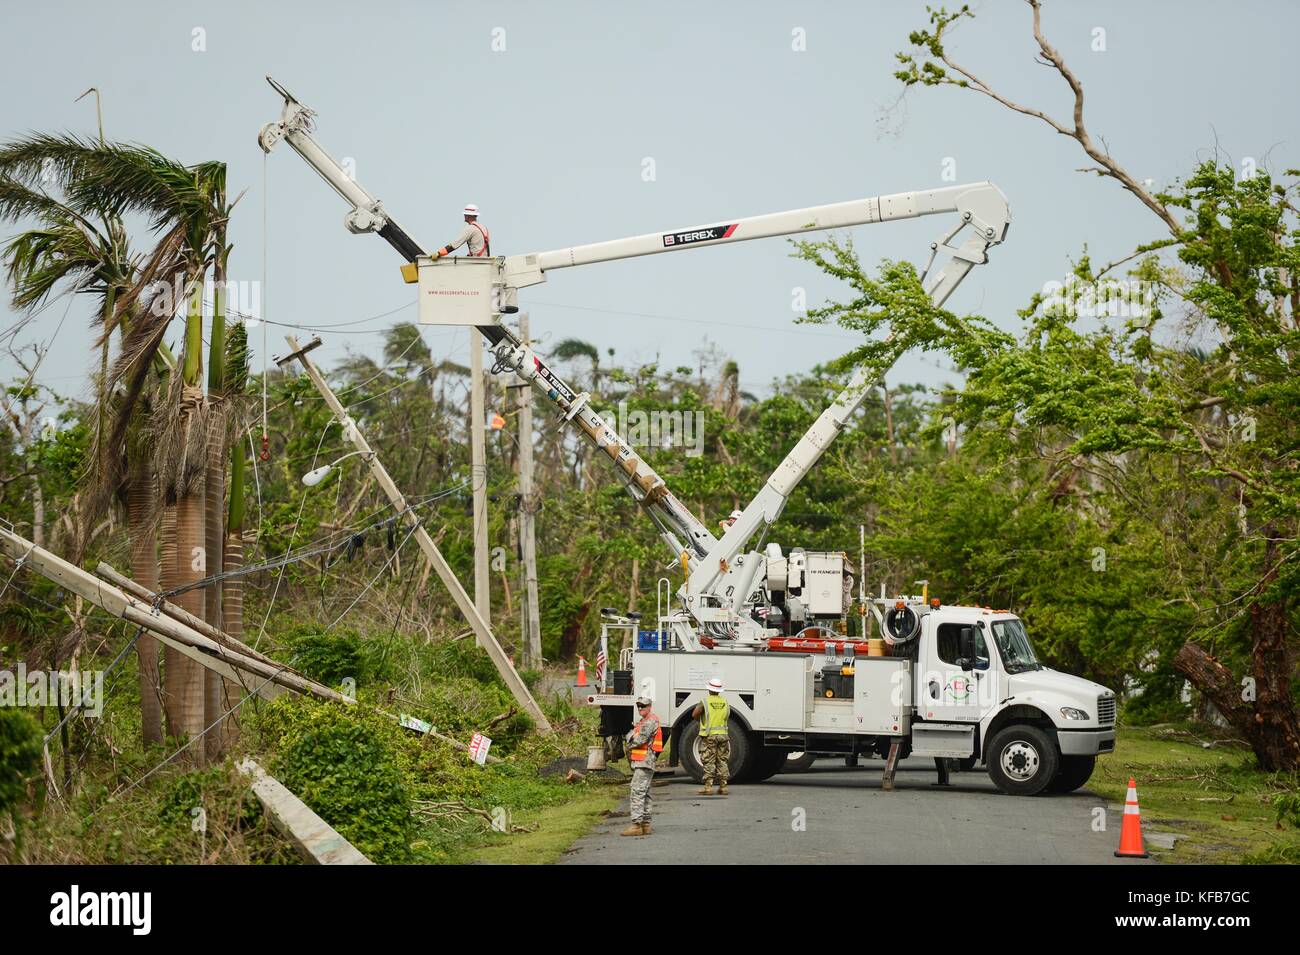 U.S. Army soldiers and Prime Power employees repair power lines during relief efforts in the aftermath of Hurricane Maria October 19, 2017 in Rio Grande, Puerto Rico.     (photo by Joshua L. DeMotts via Planetpix) Stock Photo